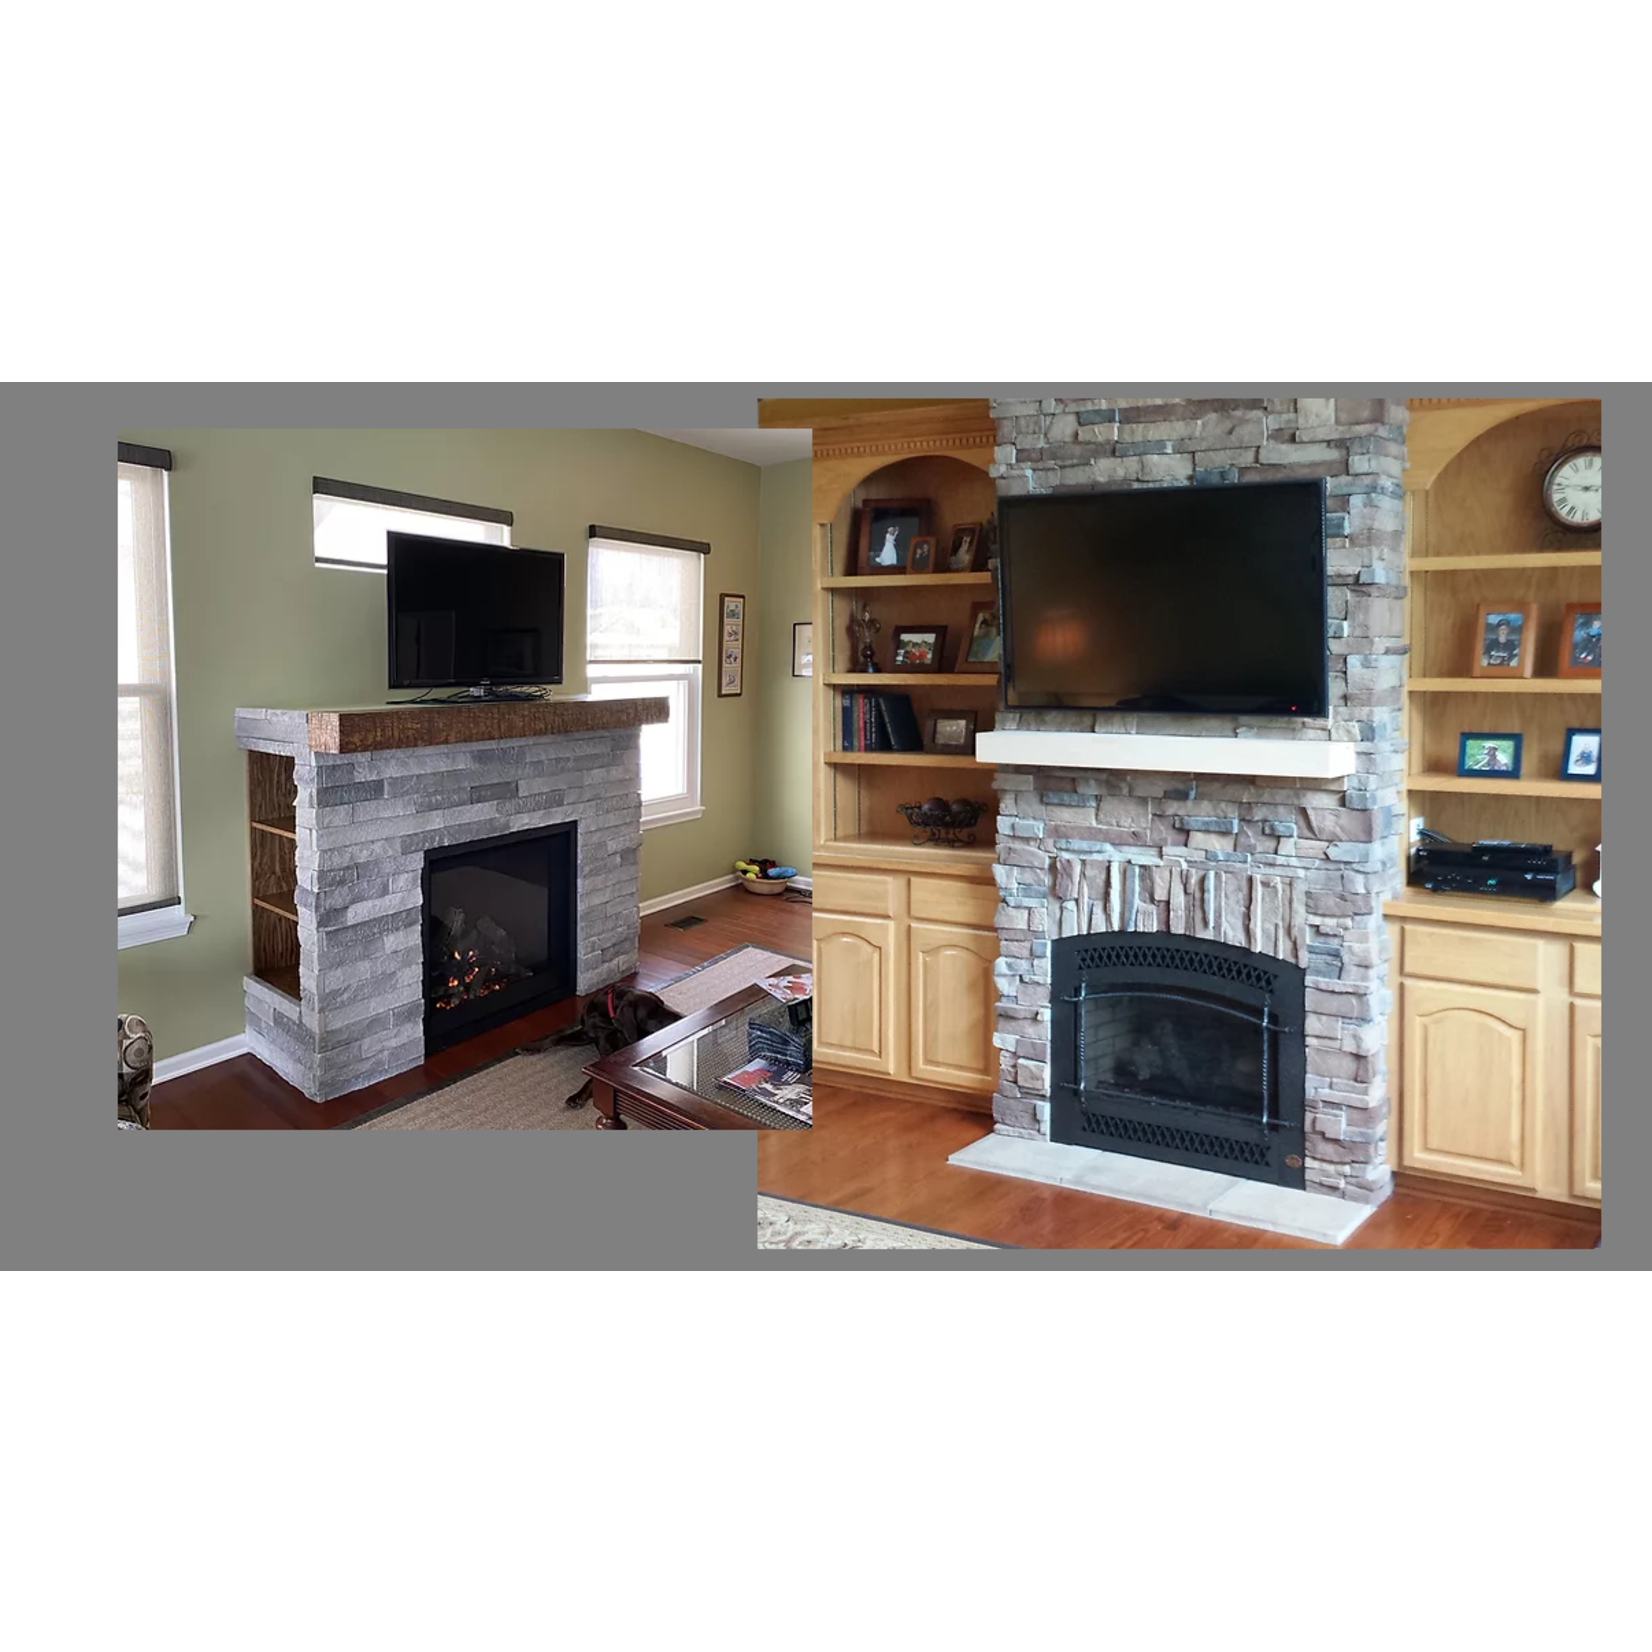 Fireplace by Design-Crystal Lake Fireplace by Design-Crystal Lake $129.00 Service call certificate